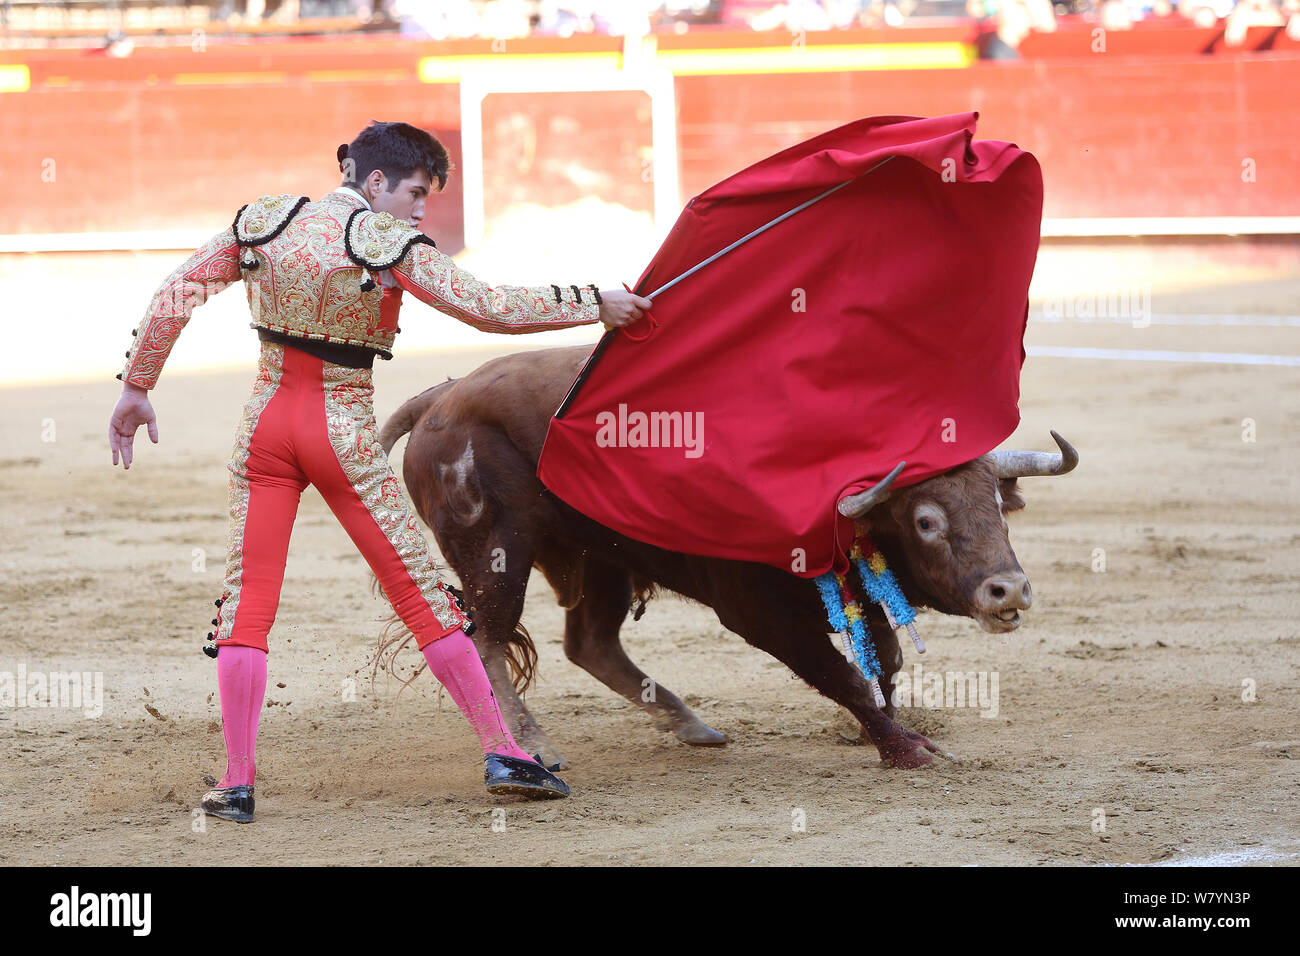 Bull Running At Red Cape Waved By Matador During Bullfight Bull Is Speared With Barbed Sticks Banderillas Plaza De Toros Valencia Spain July 14 Stock Photo Alamy